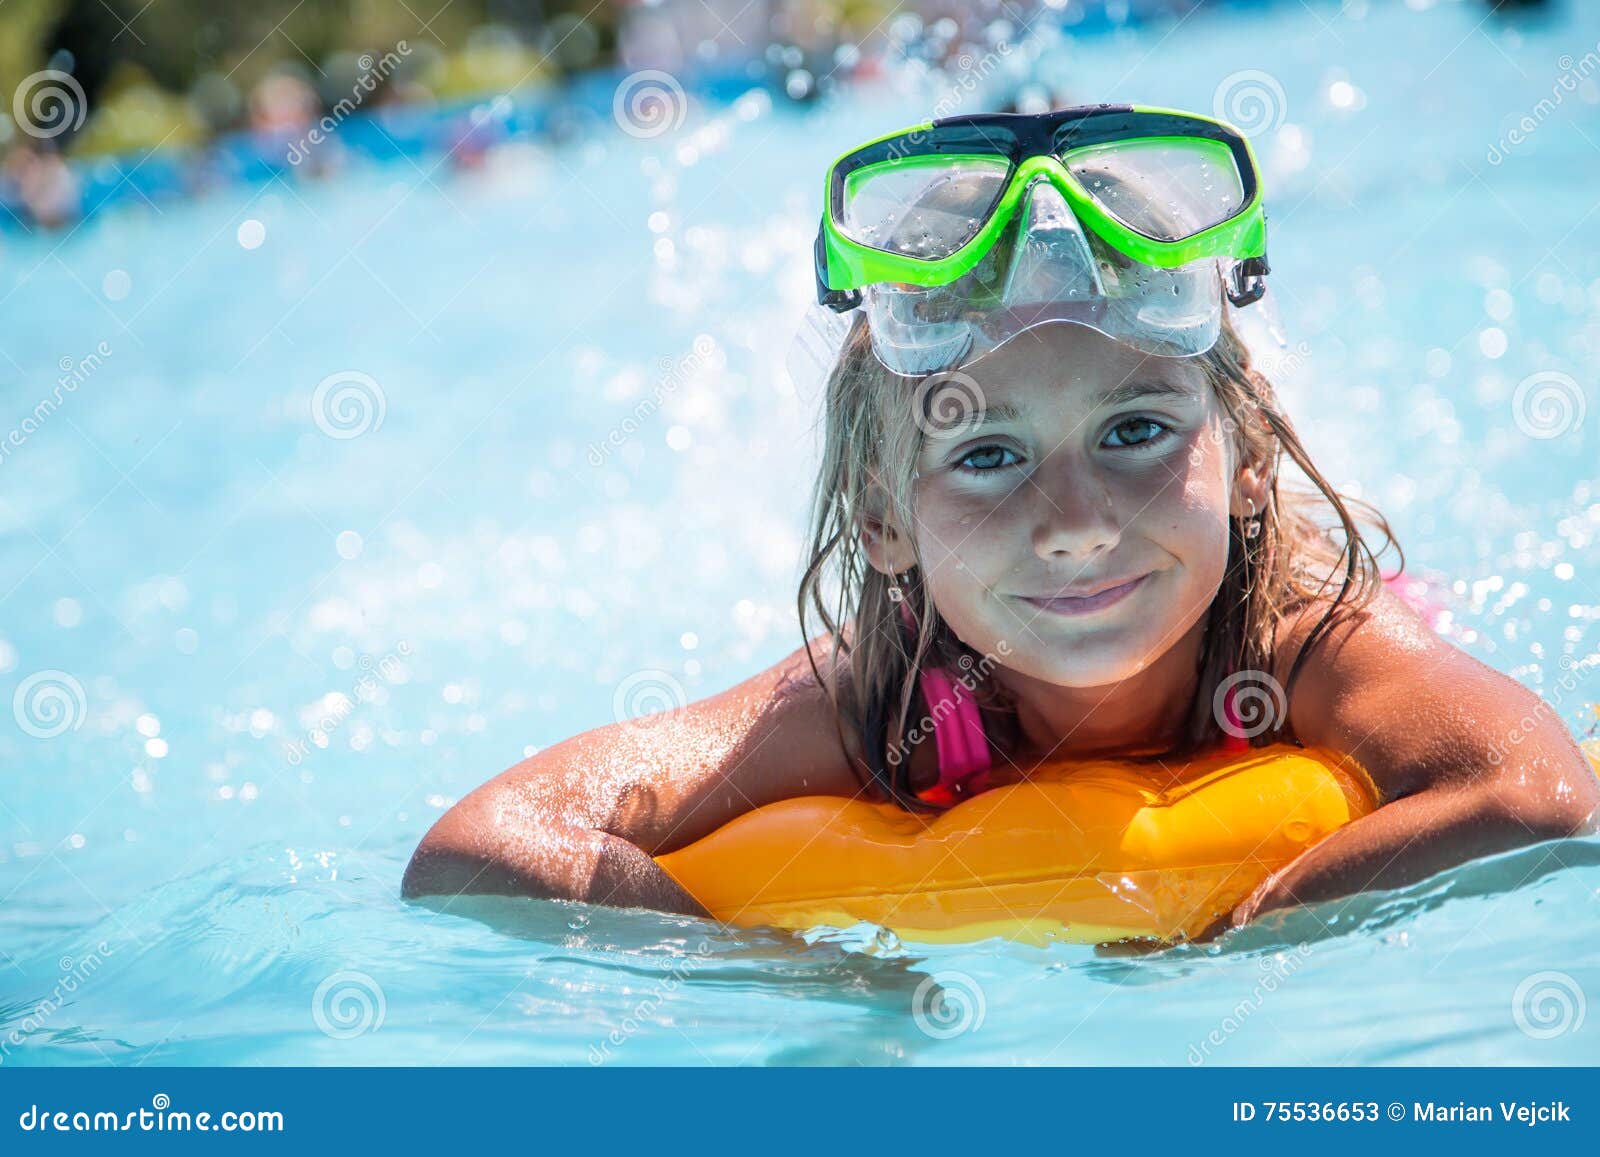 Happy Girl Child Playing in the Pool on a Sunny Day. Cute Little Girl ...